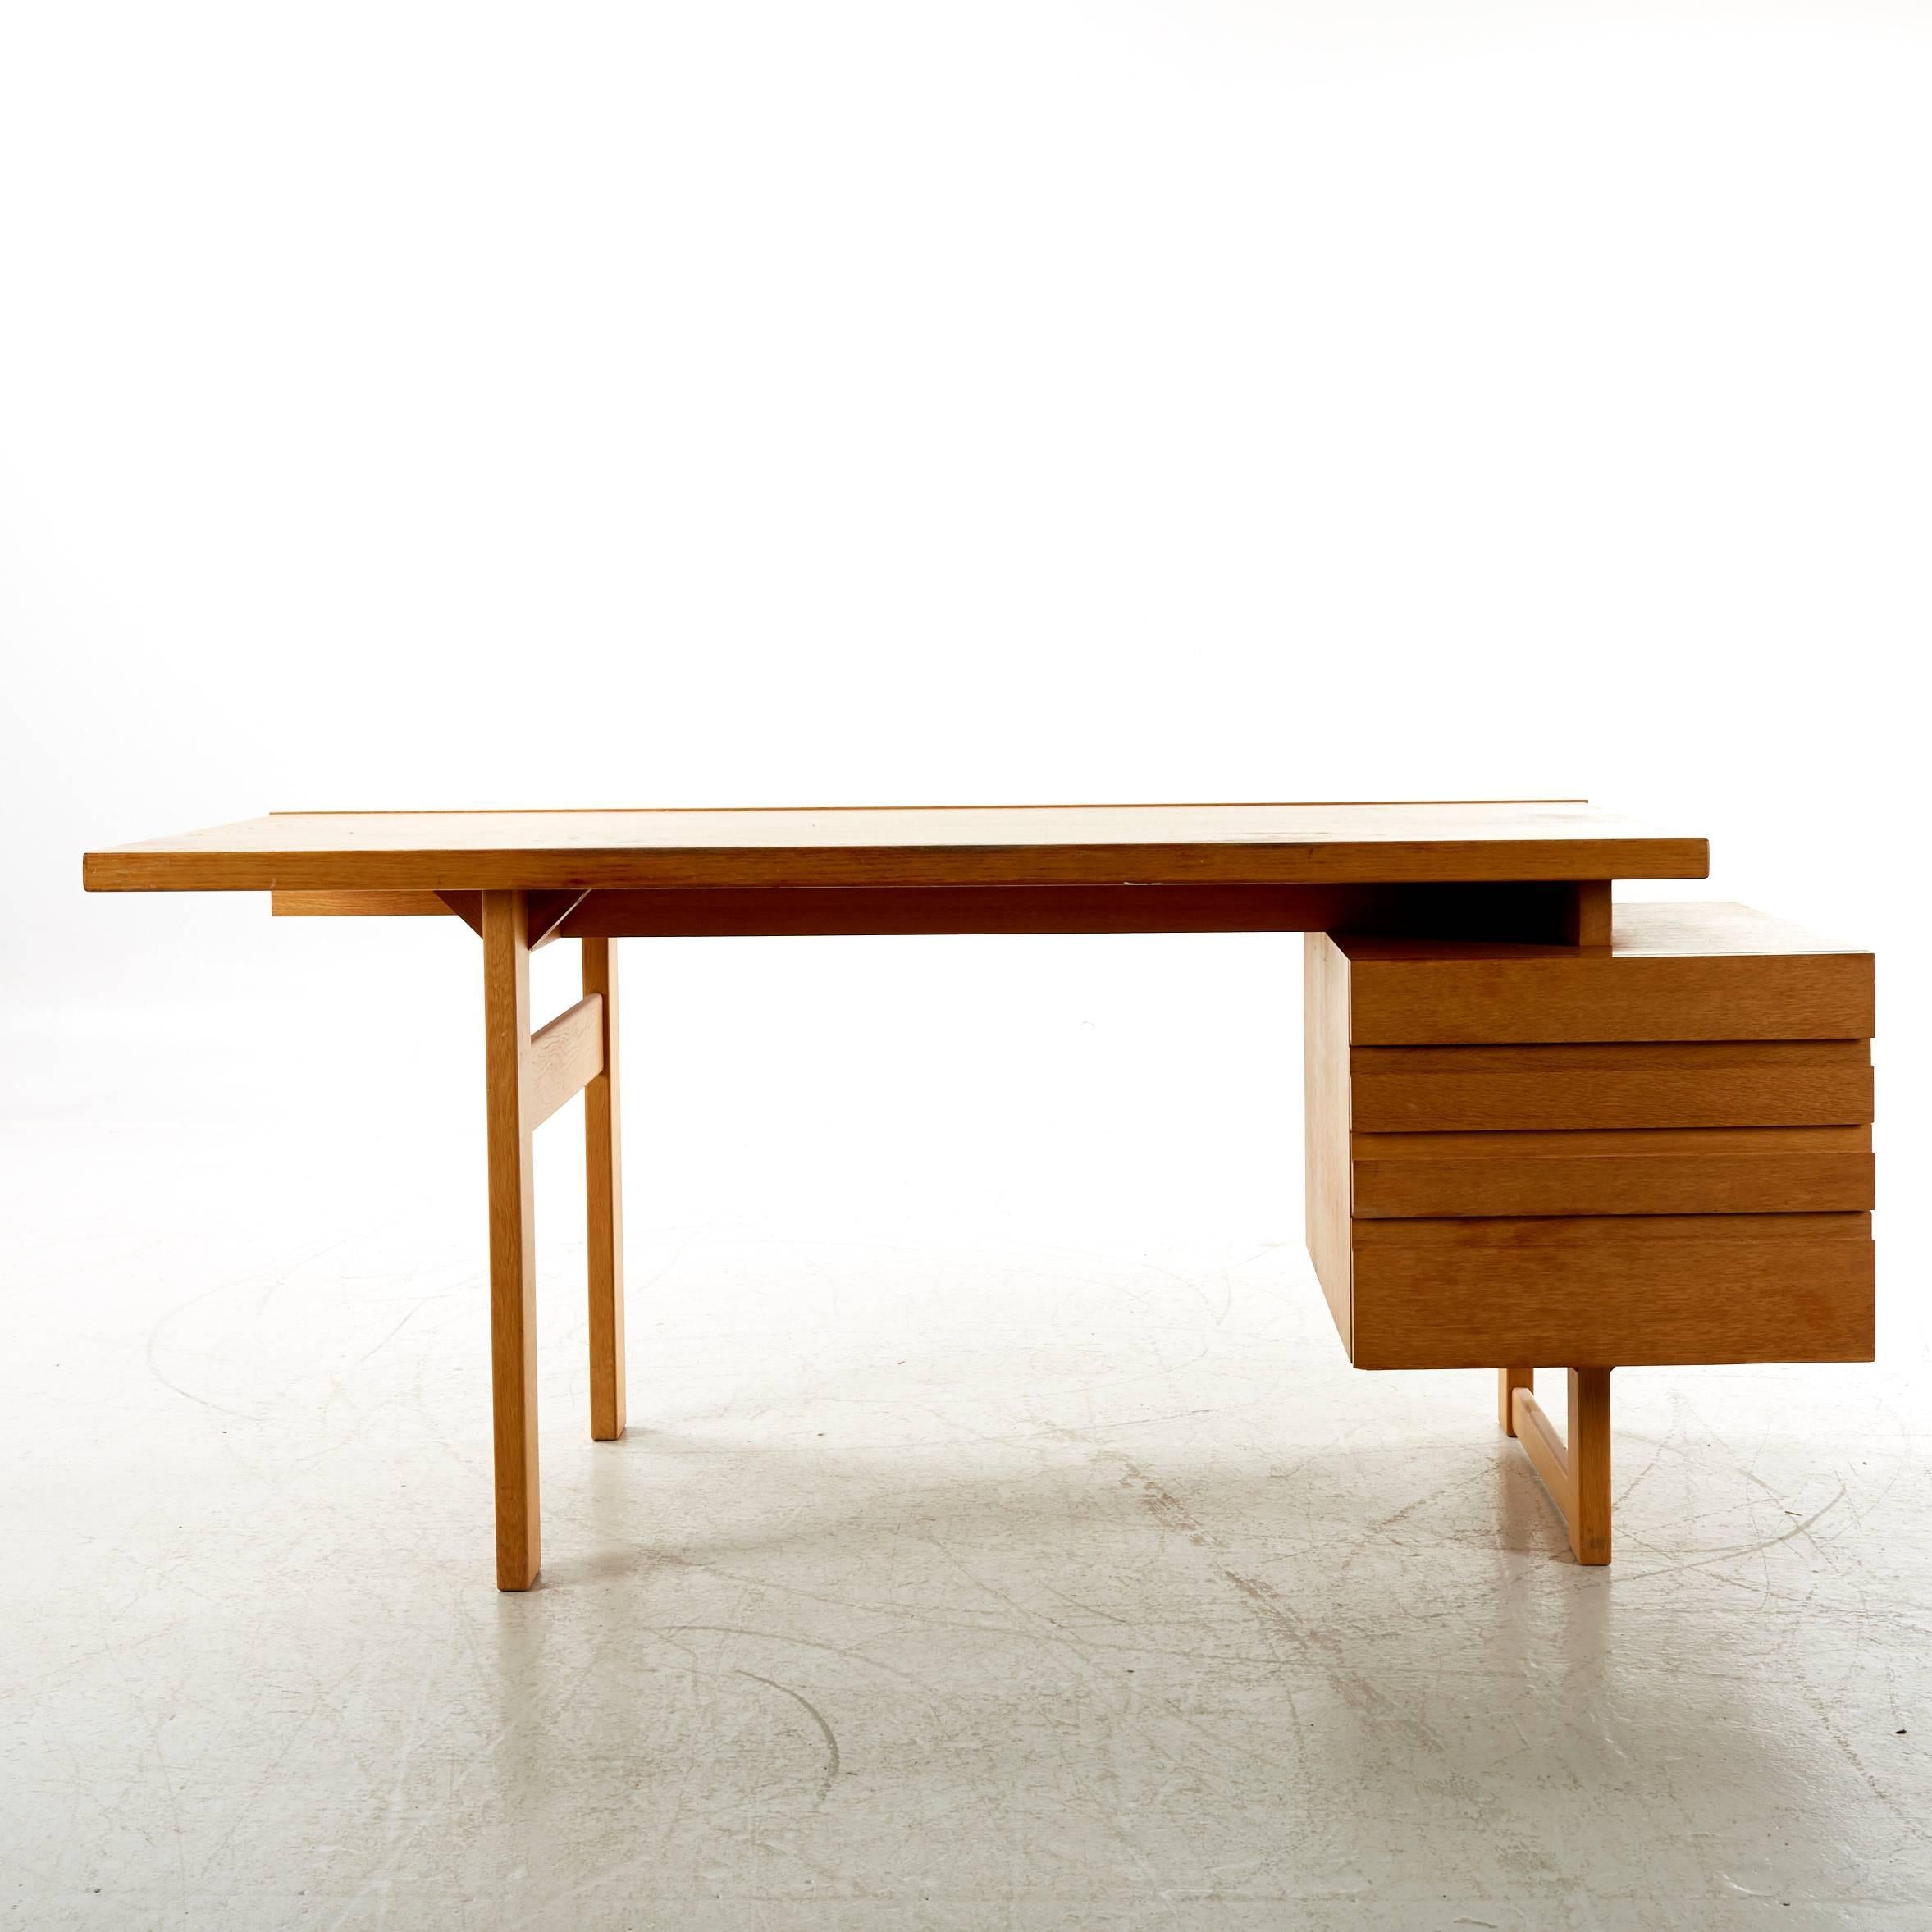 Exceptional desk board designed by Olavi Hanninen from Finland in 1950. This massive and geometrical desk mix up both tradition and modernity in one art piece.